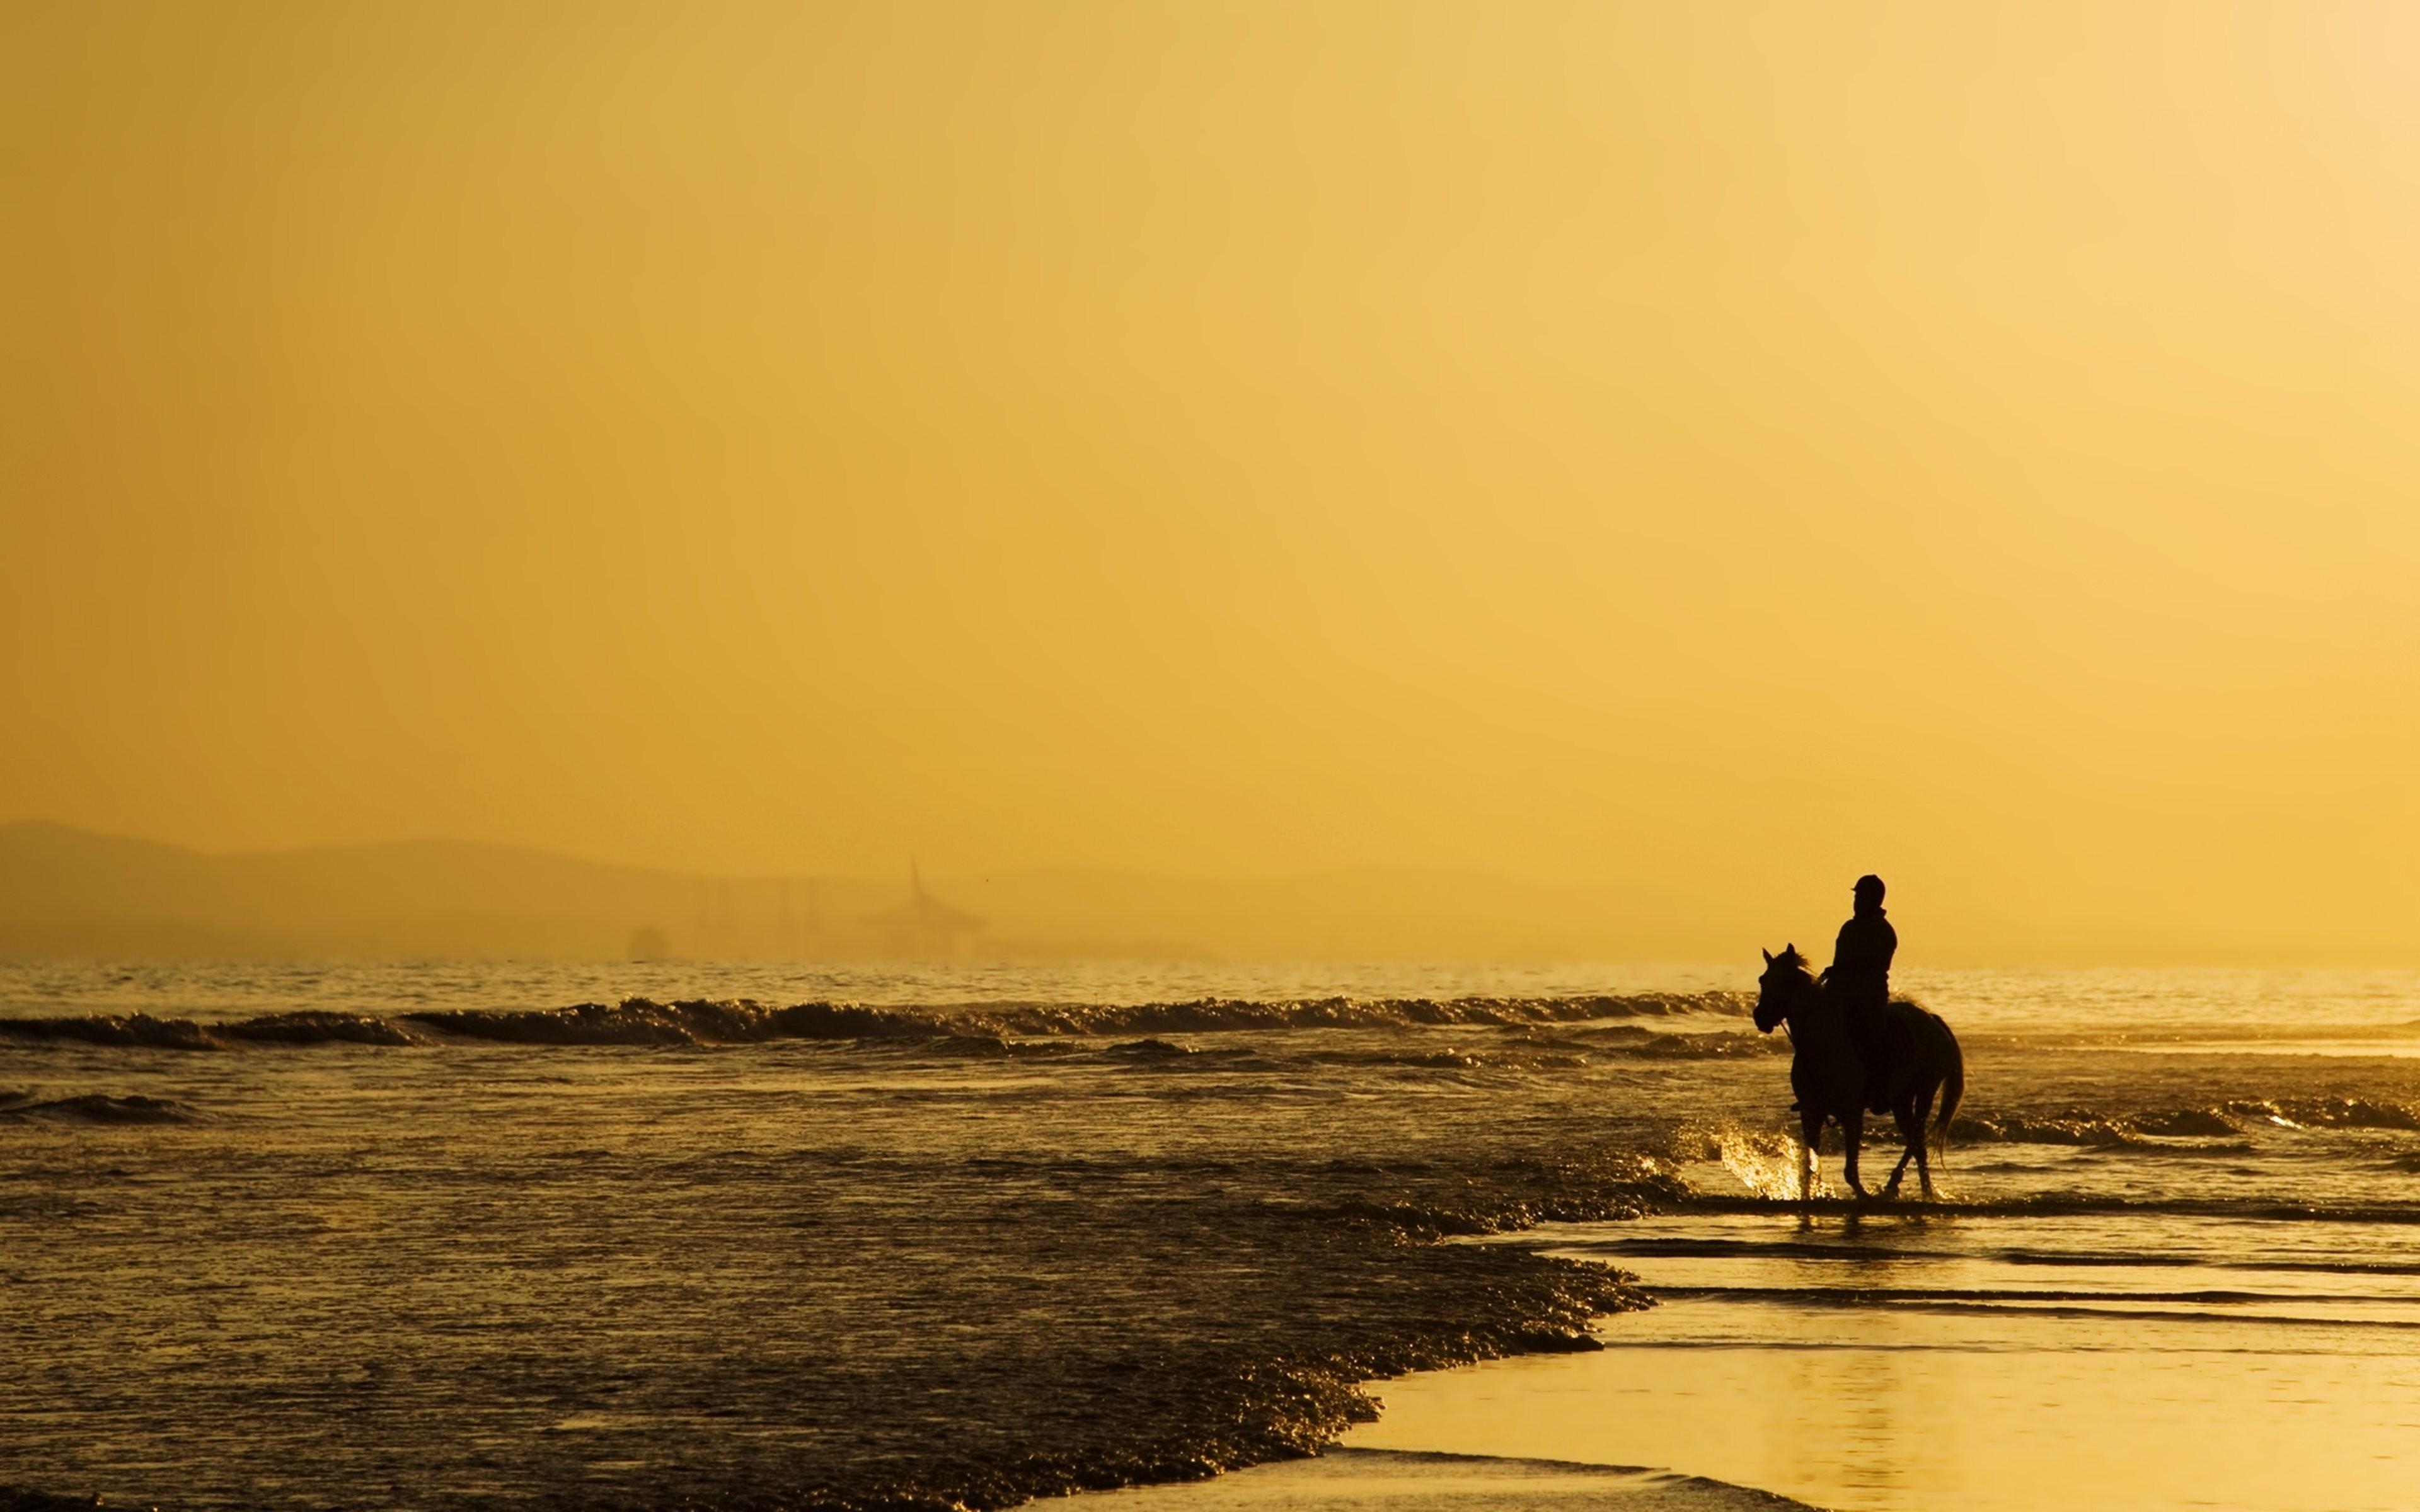 Sea, Beaches, Horse, Sky, Yellow, Landscapes, Nature, Earth, Alone